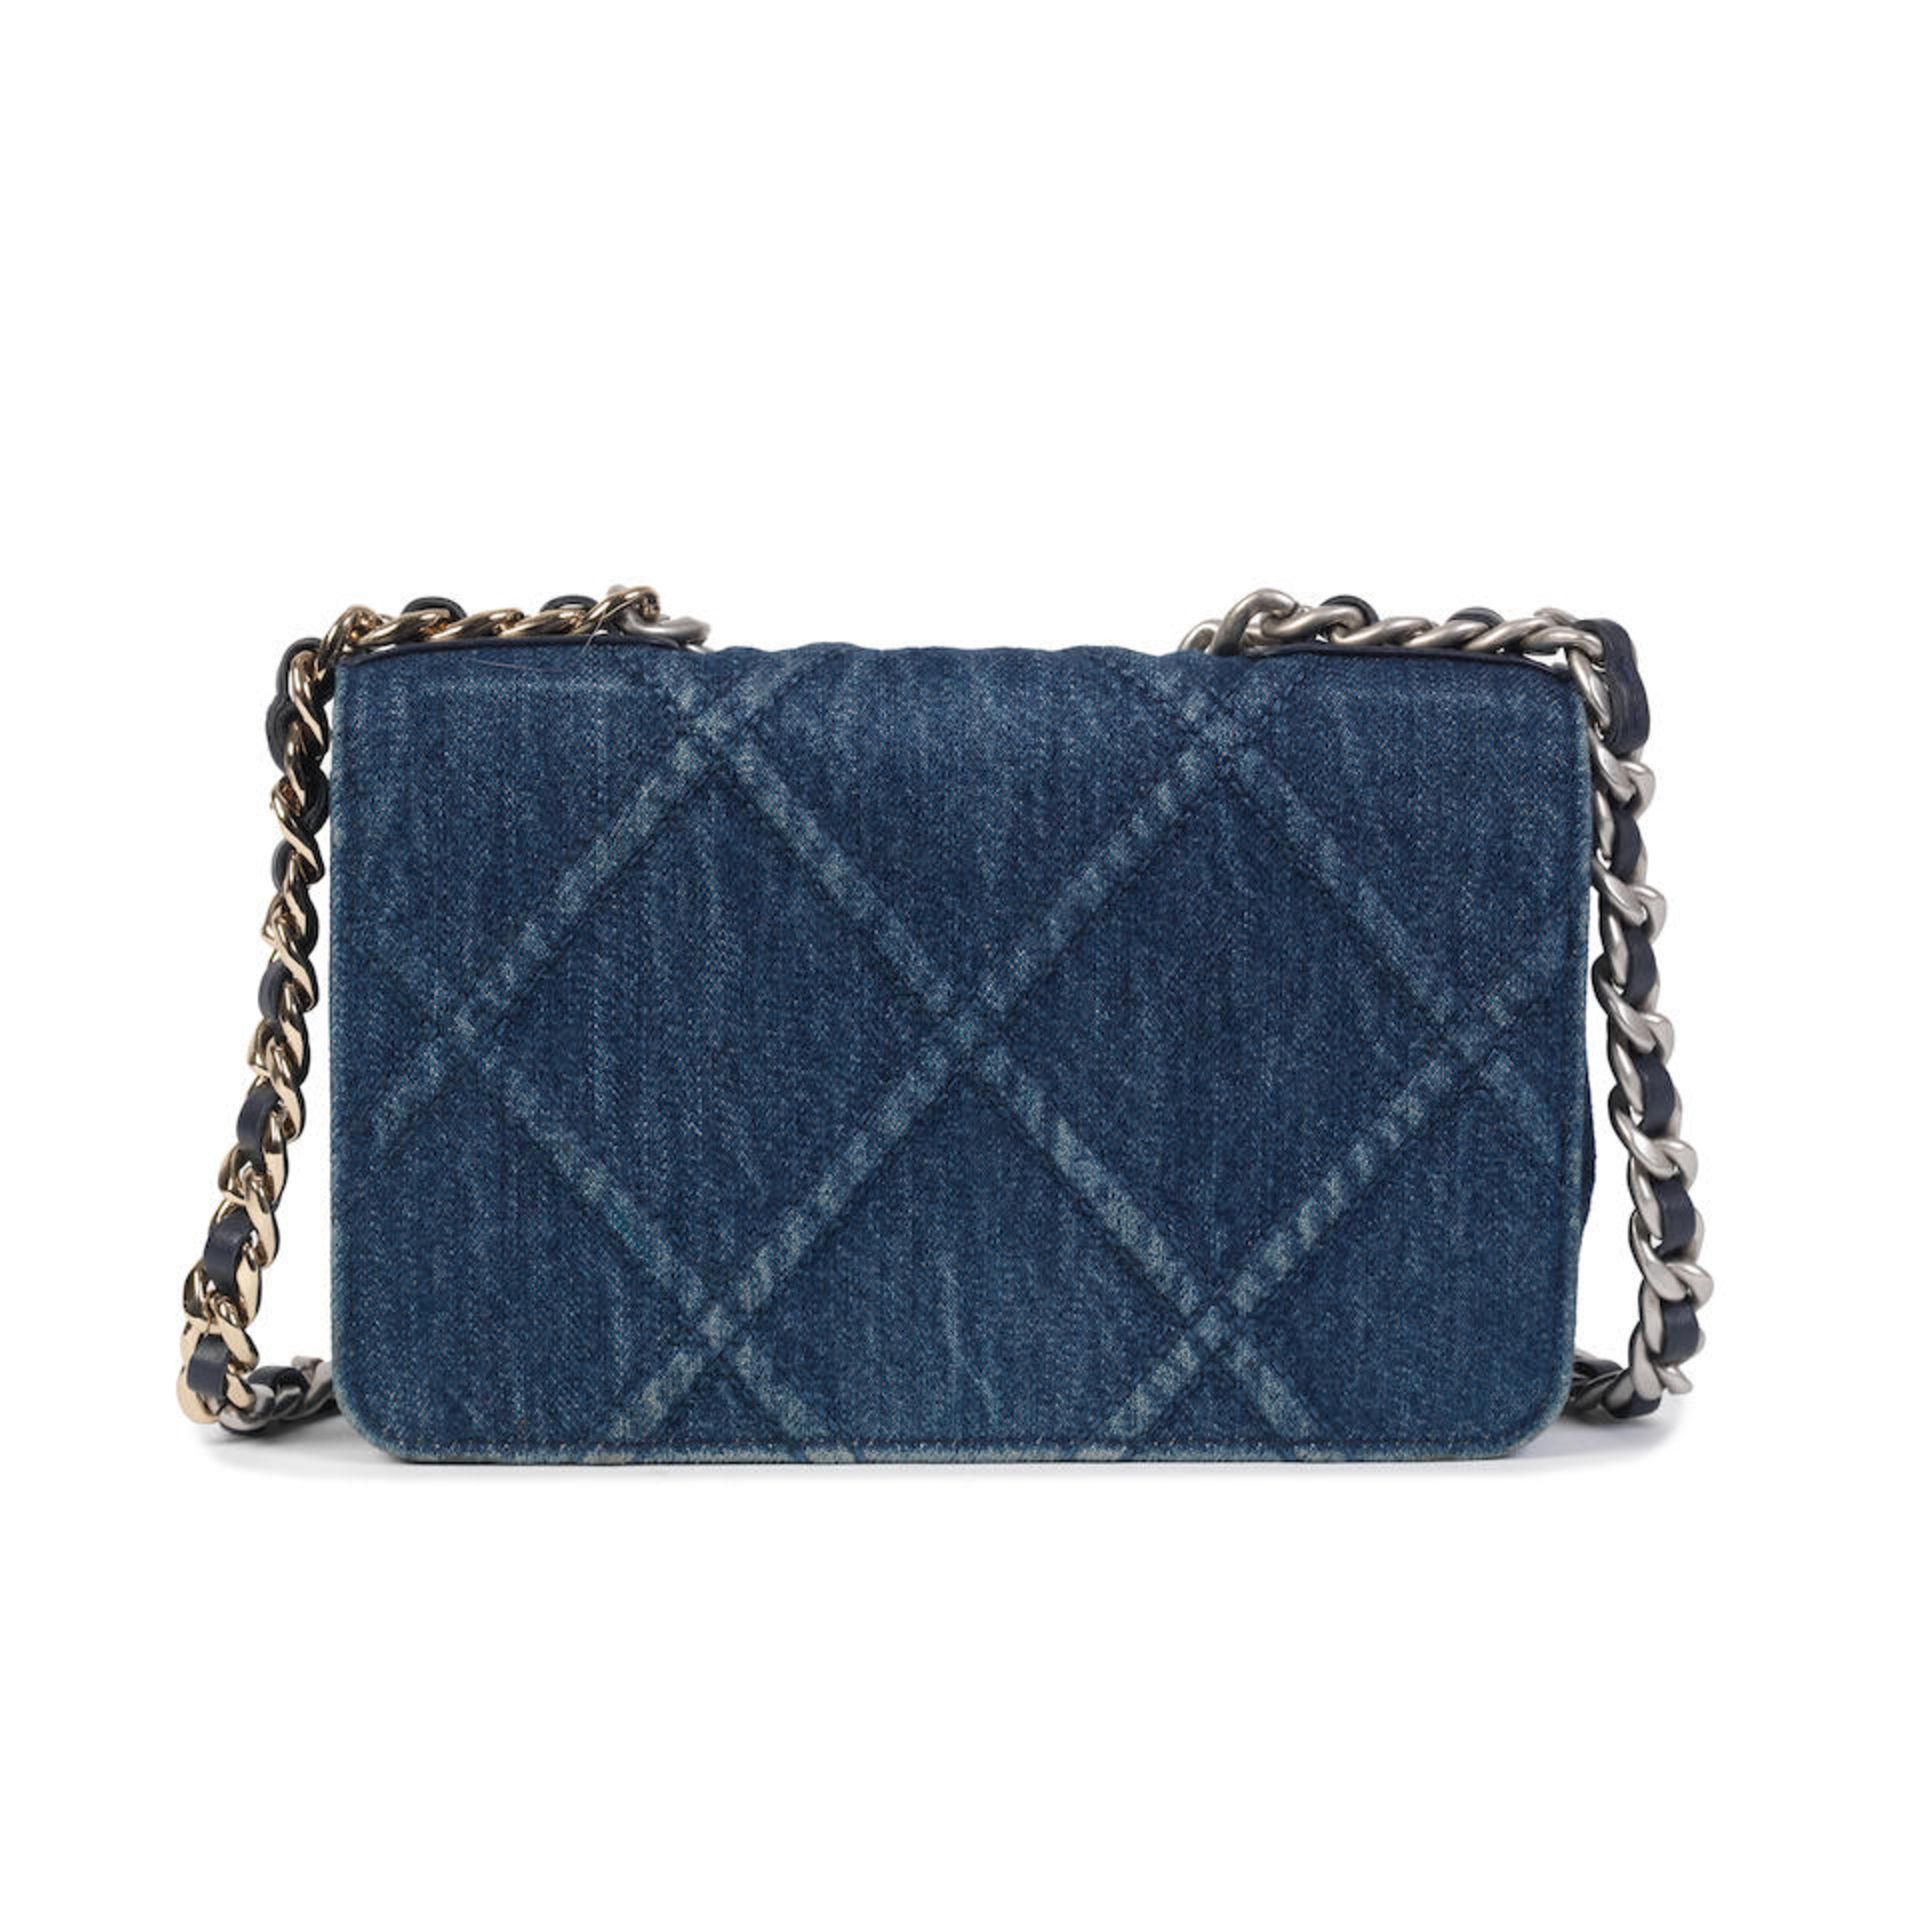 Virginie Viard for Chanel: a Blue Denim 19 Wallet on Chain (WOC) 2022 - Image 2 of 2